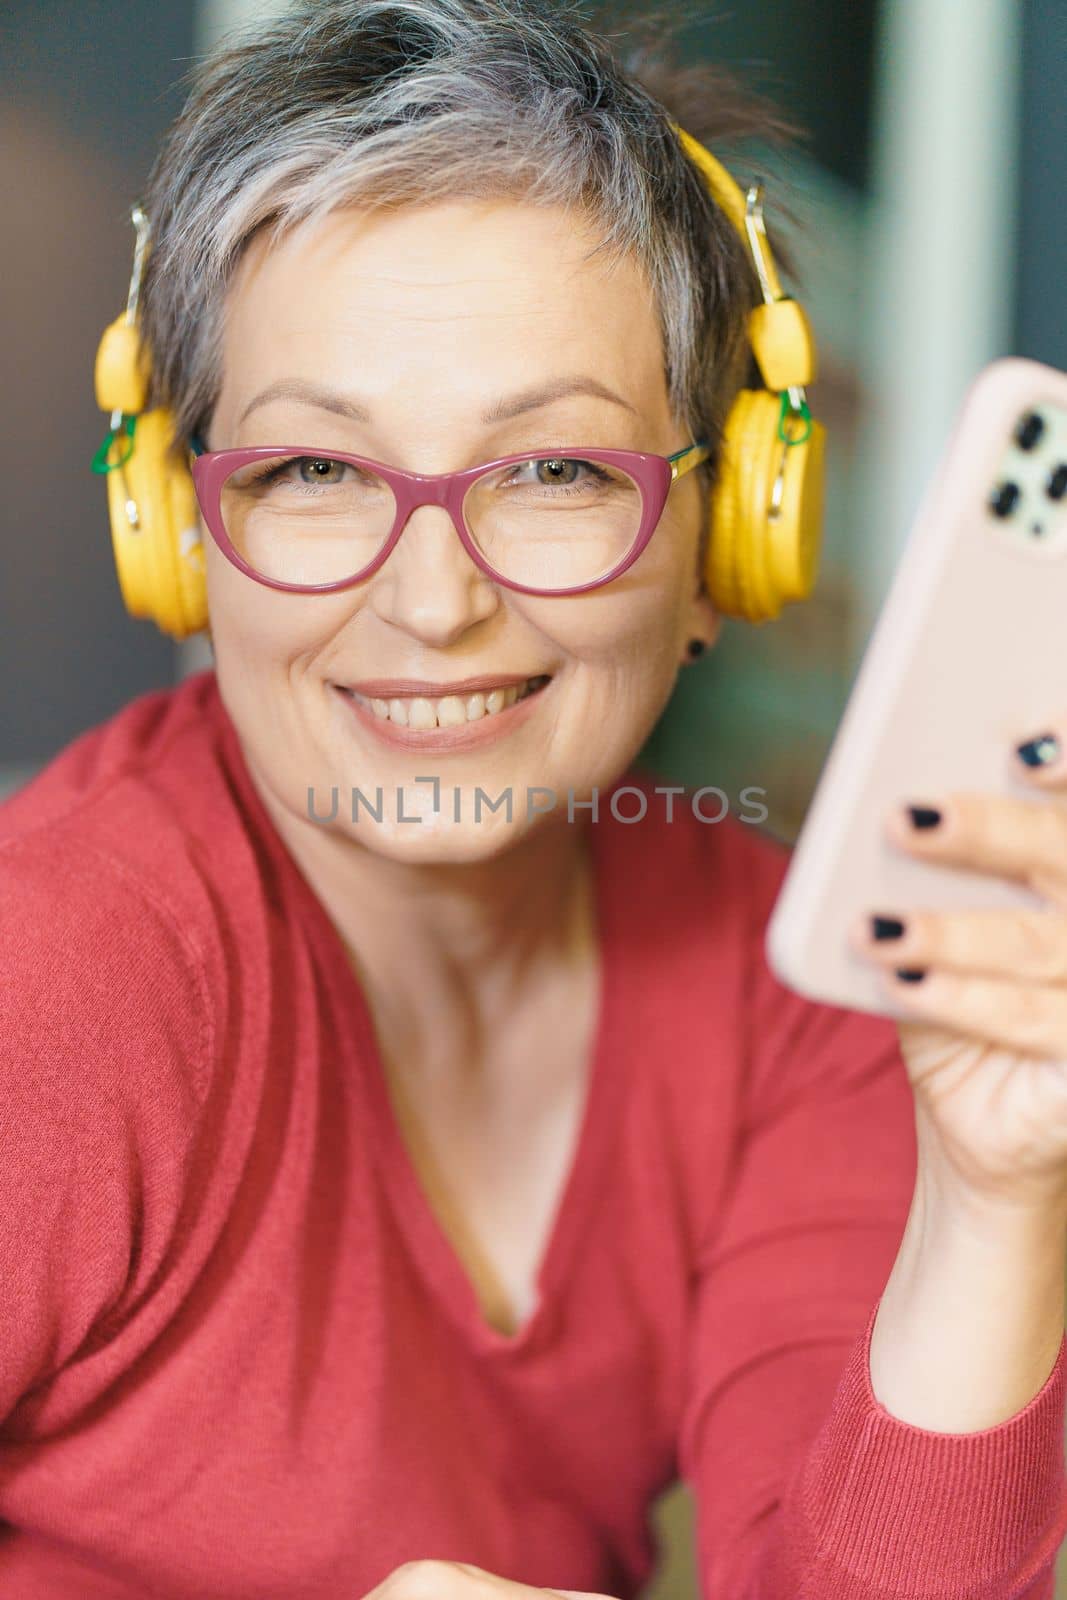 Mature woman wearing glasses, smiling and holding phone headphones on. Image portrays technology, communication, and entertainment, while woman's happy expression reflects her enjoyment and satisfaction with modernity by LipikStockMedia